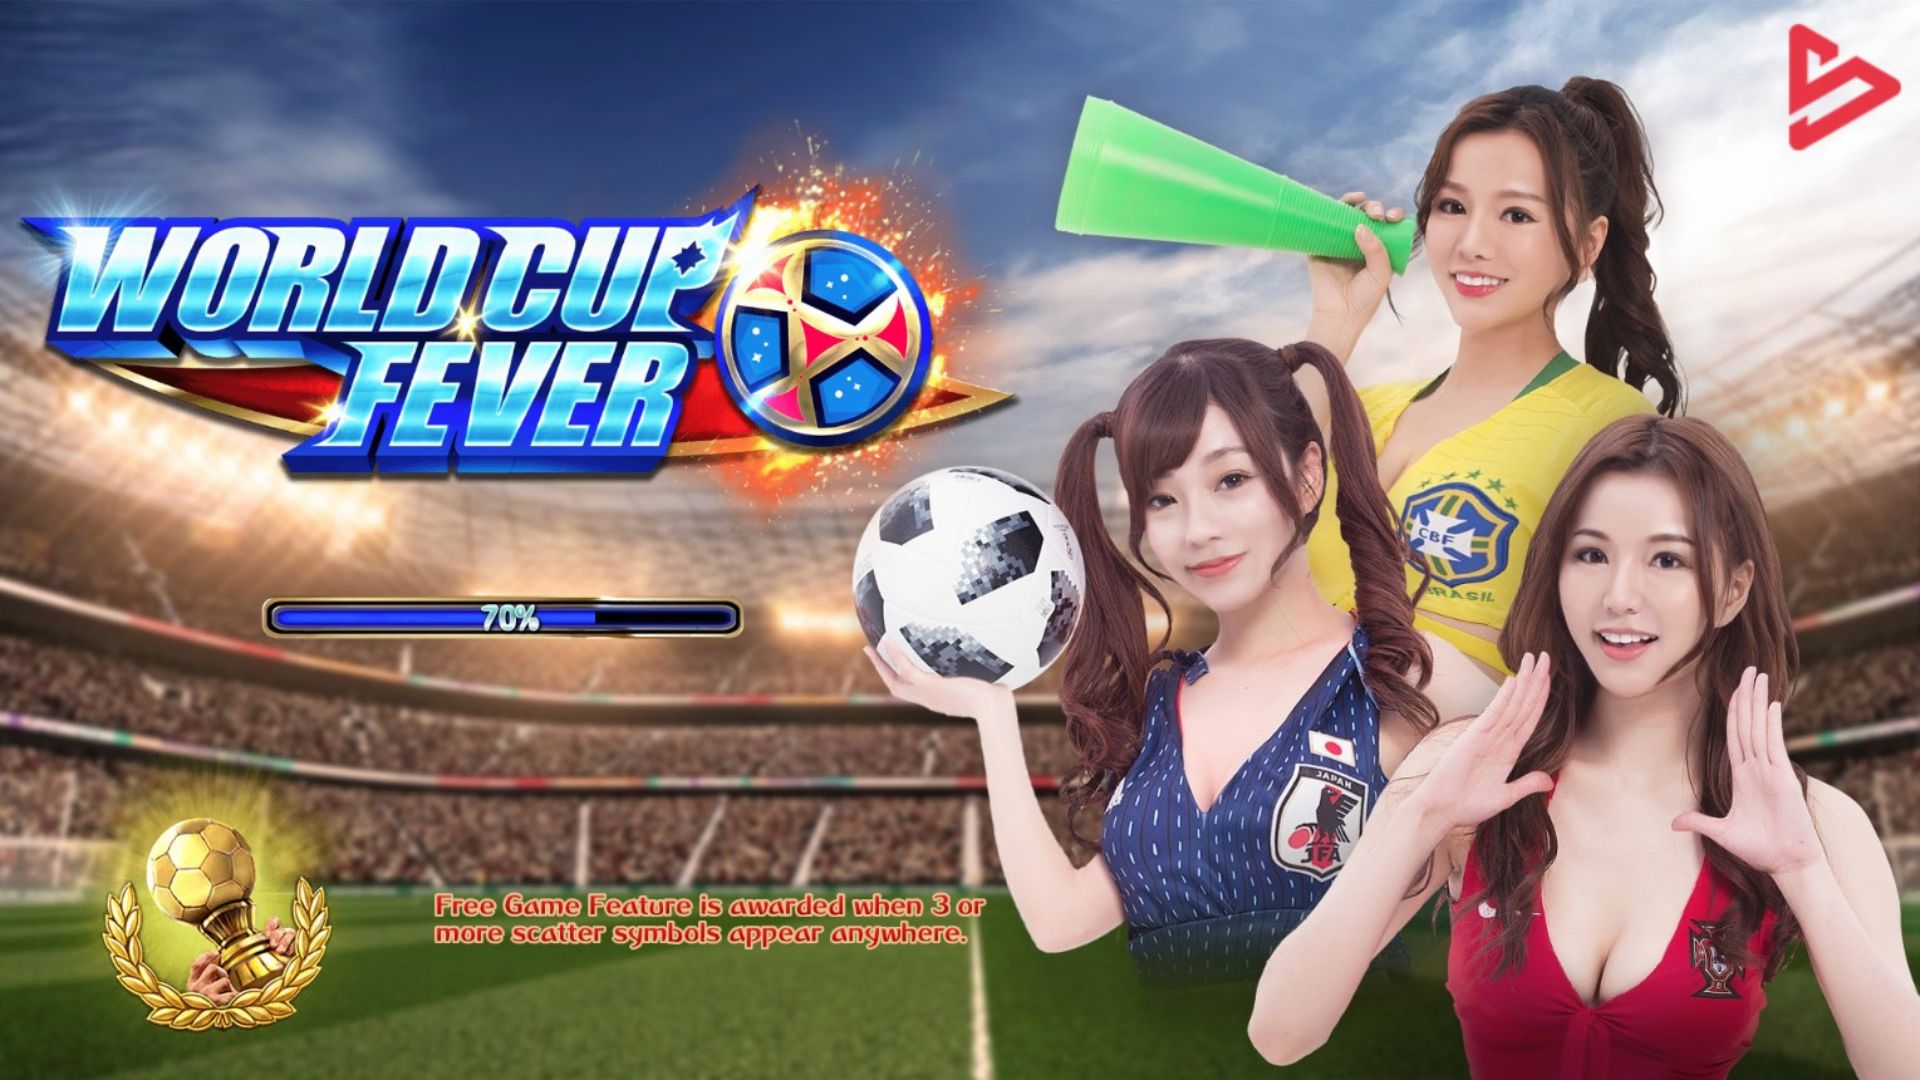 review game slot world cup fever